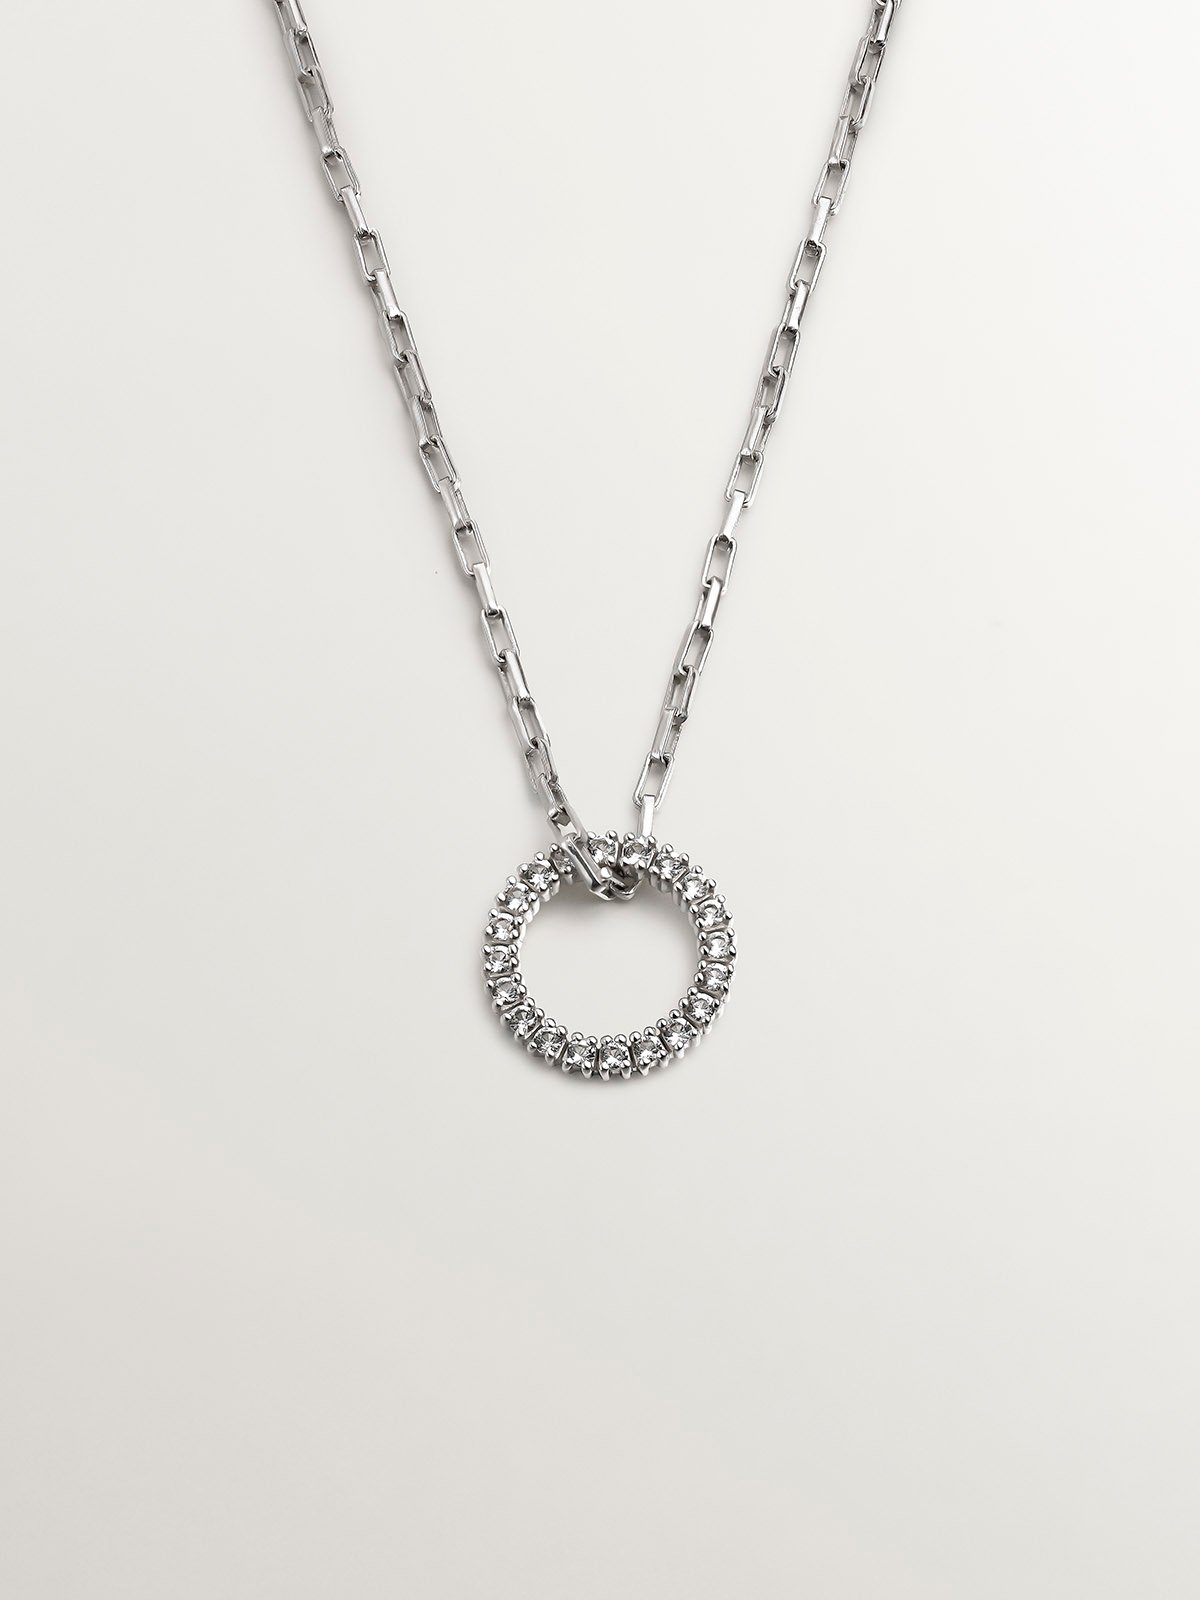 925 Silver pendant with circle of white topazes.